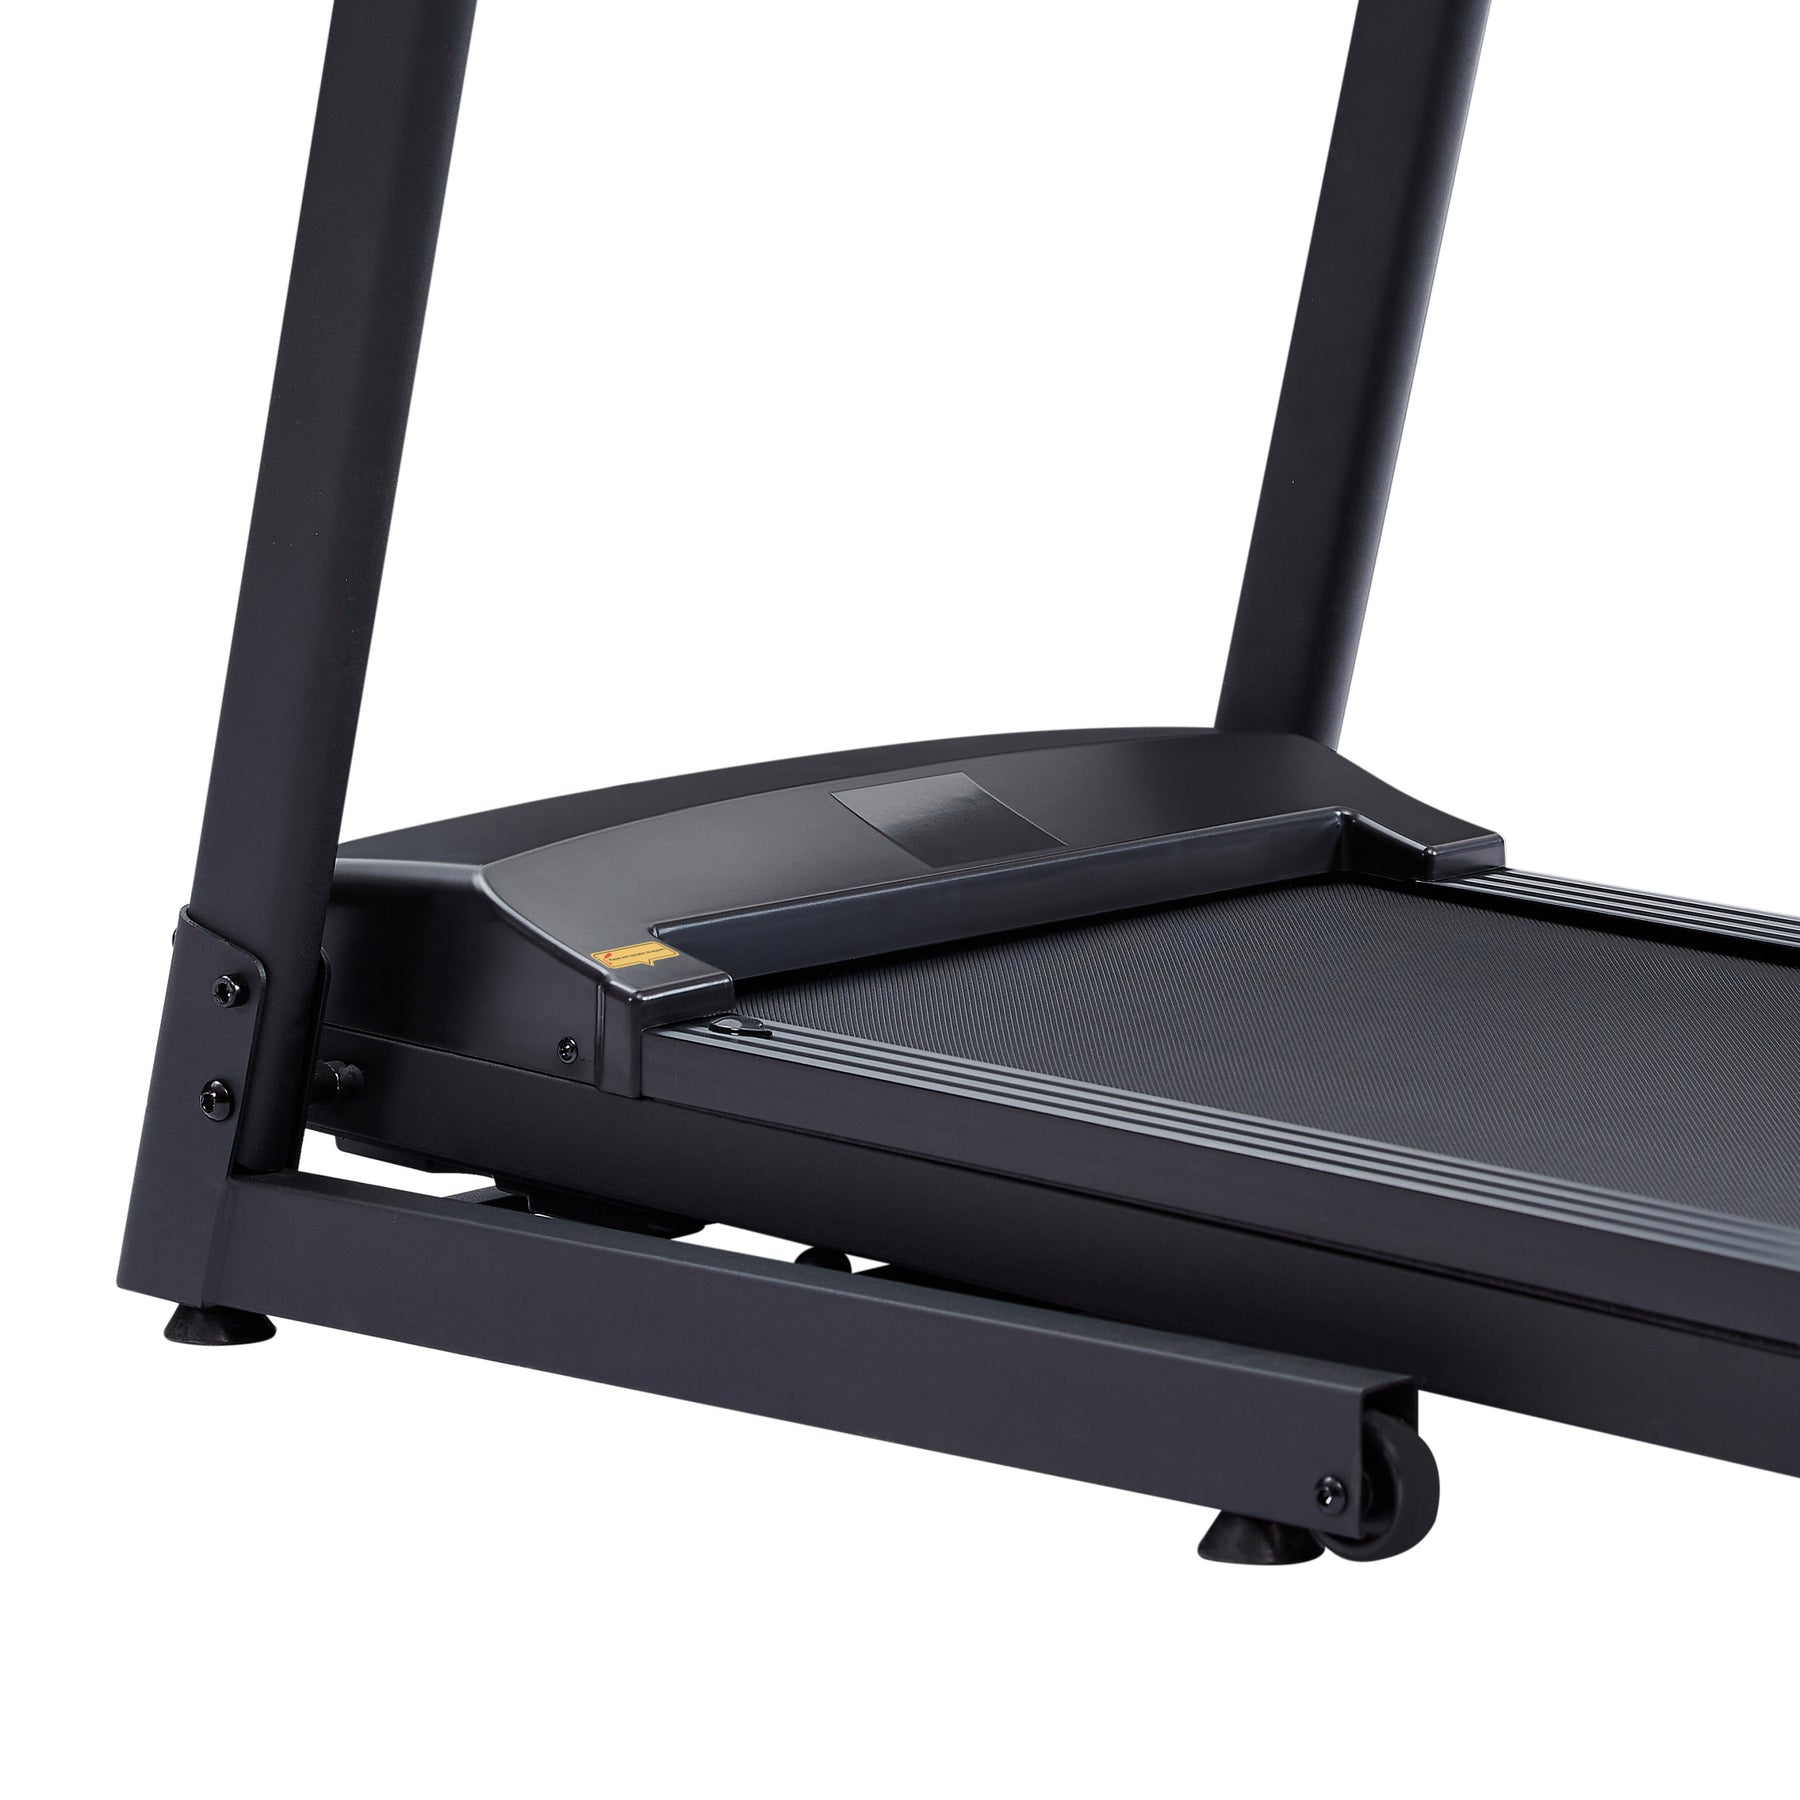 Treadmills - 2.5 HP hydraulic folding removable treadmill with 3-speed incline adjustment, 12 preset programs, 3 countdown modes, heart rate, bluetooth and more, suitable for home and gym use - Tonkn